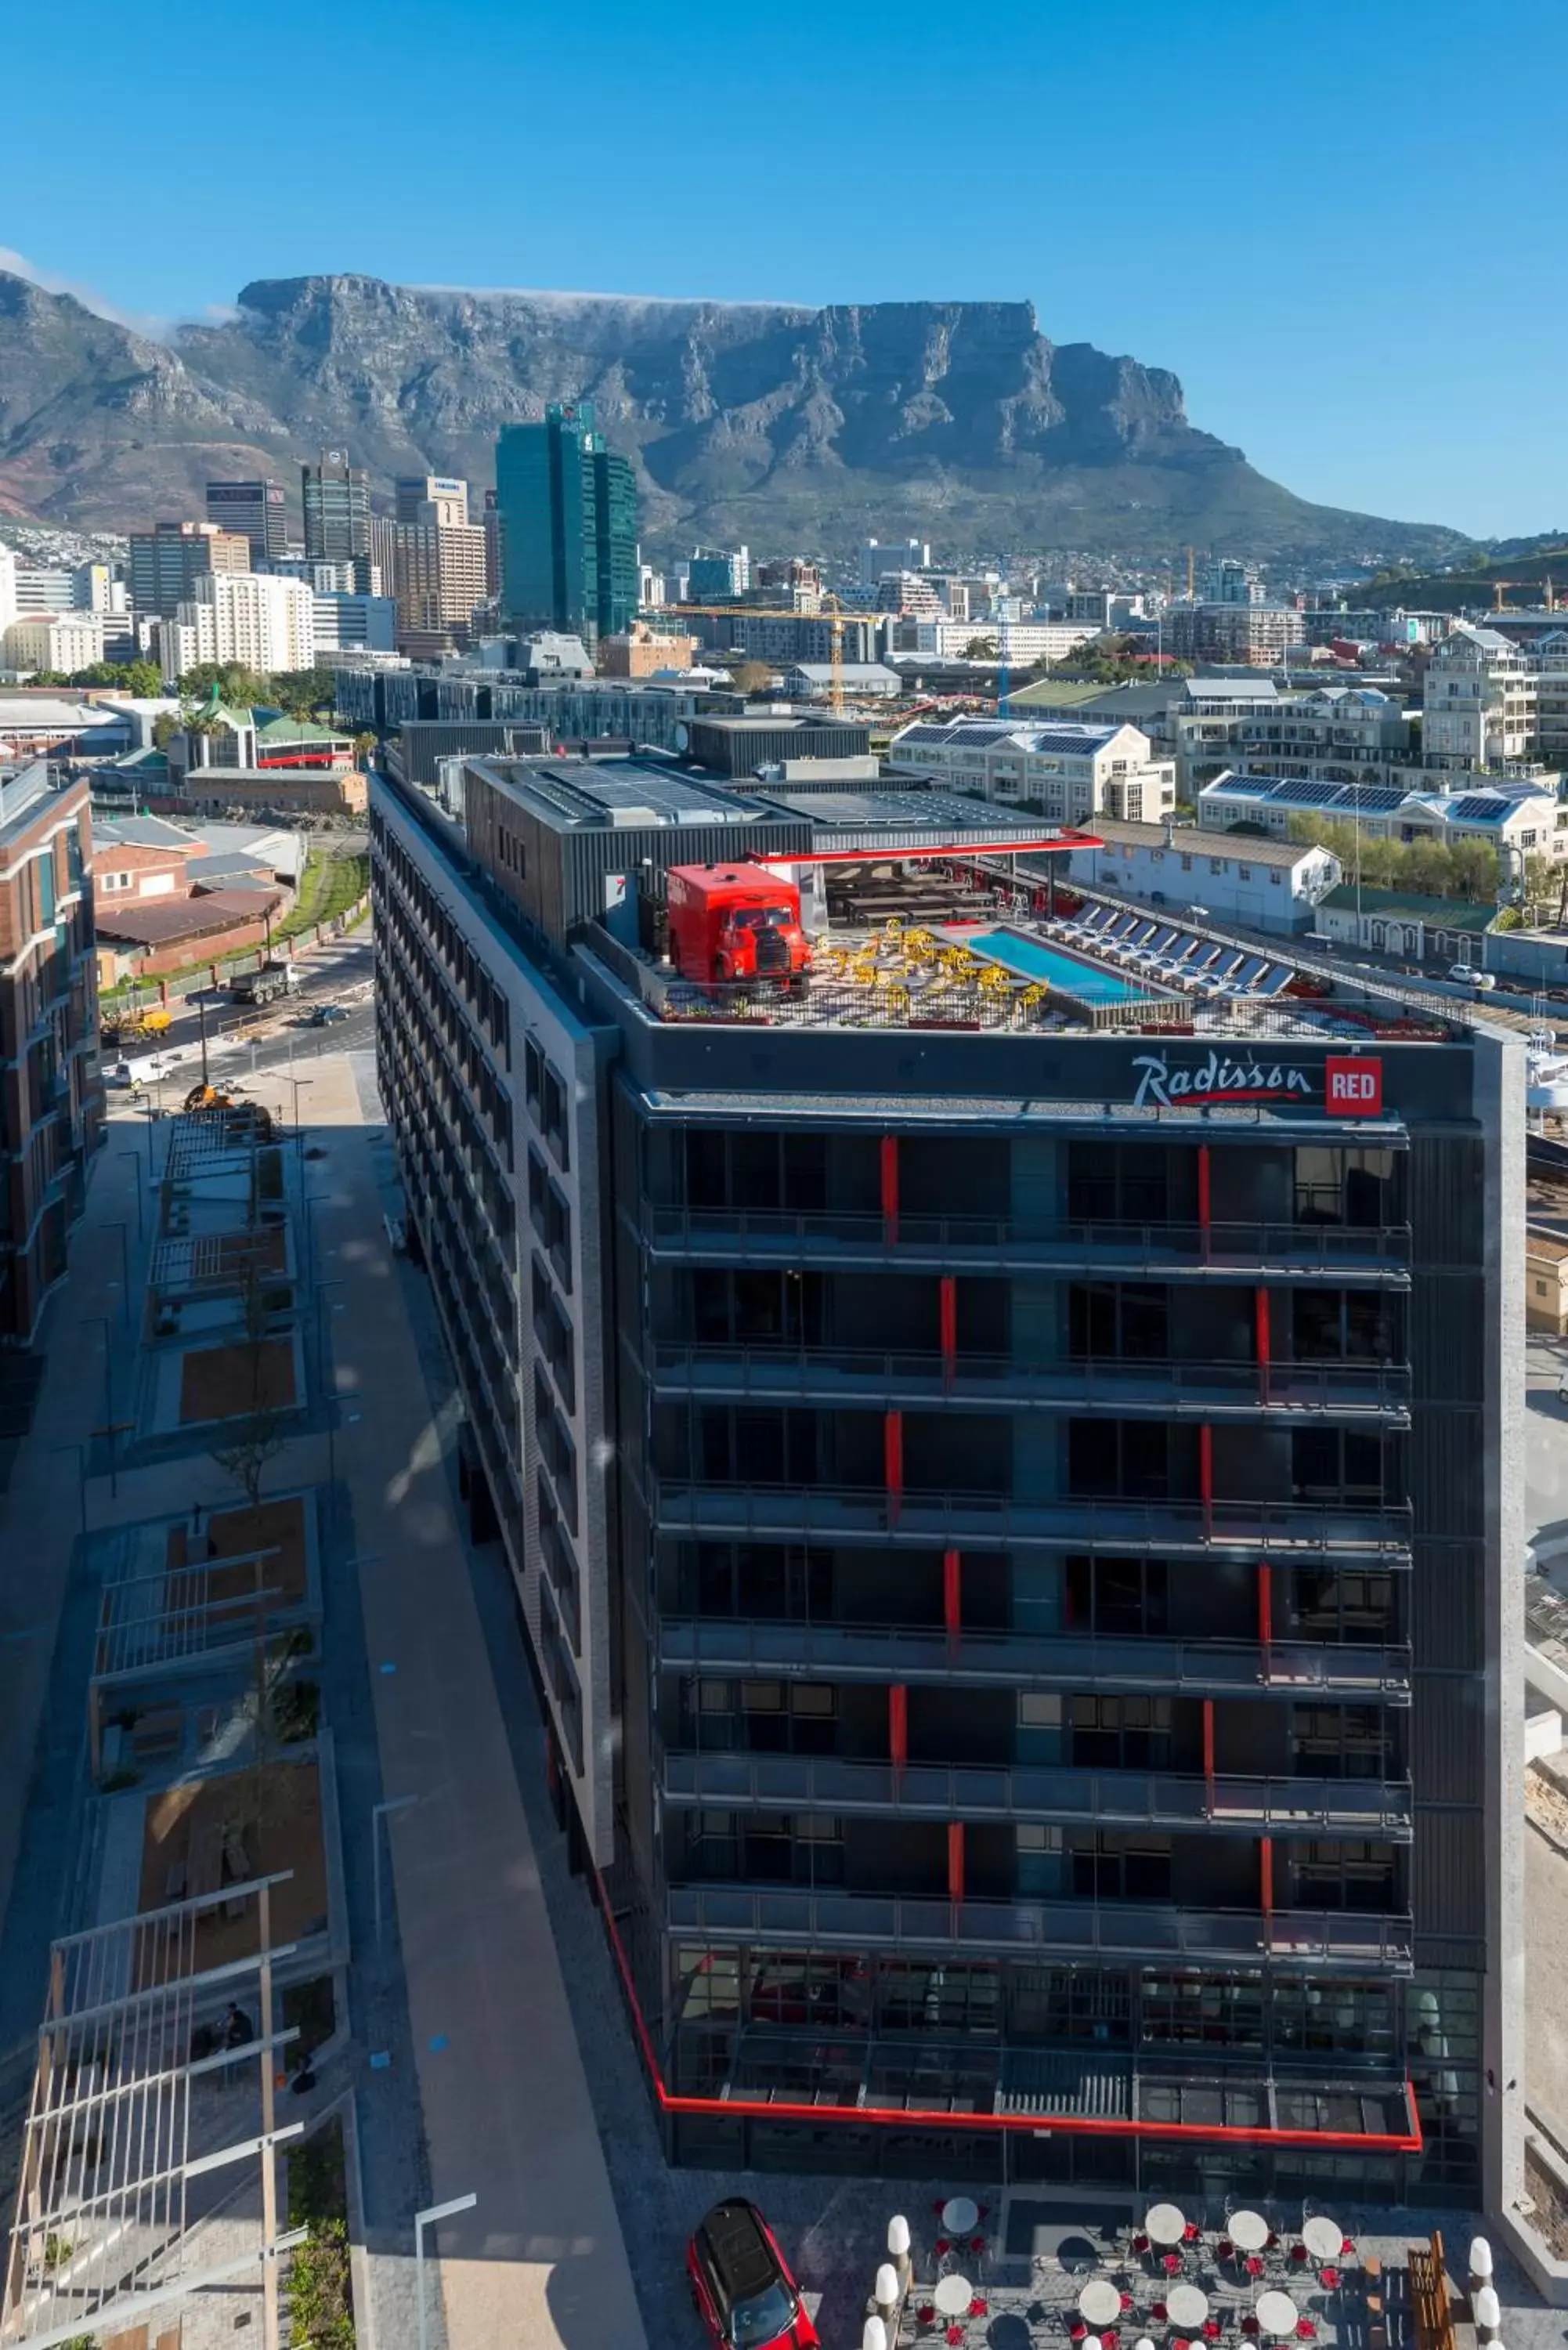 Bird's eye view in Radisson RED Hotel V&A Waterfront Cape Town